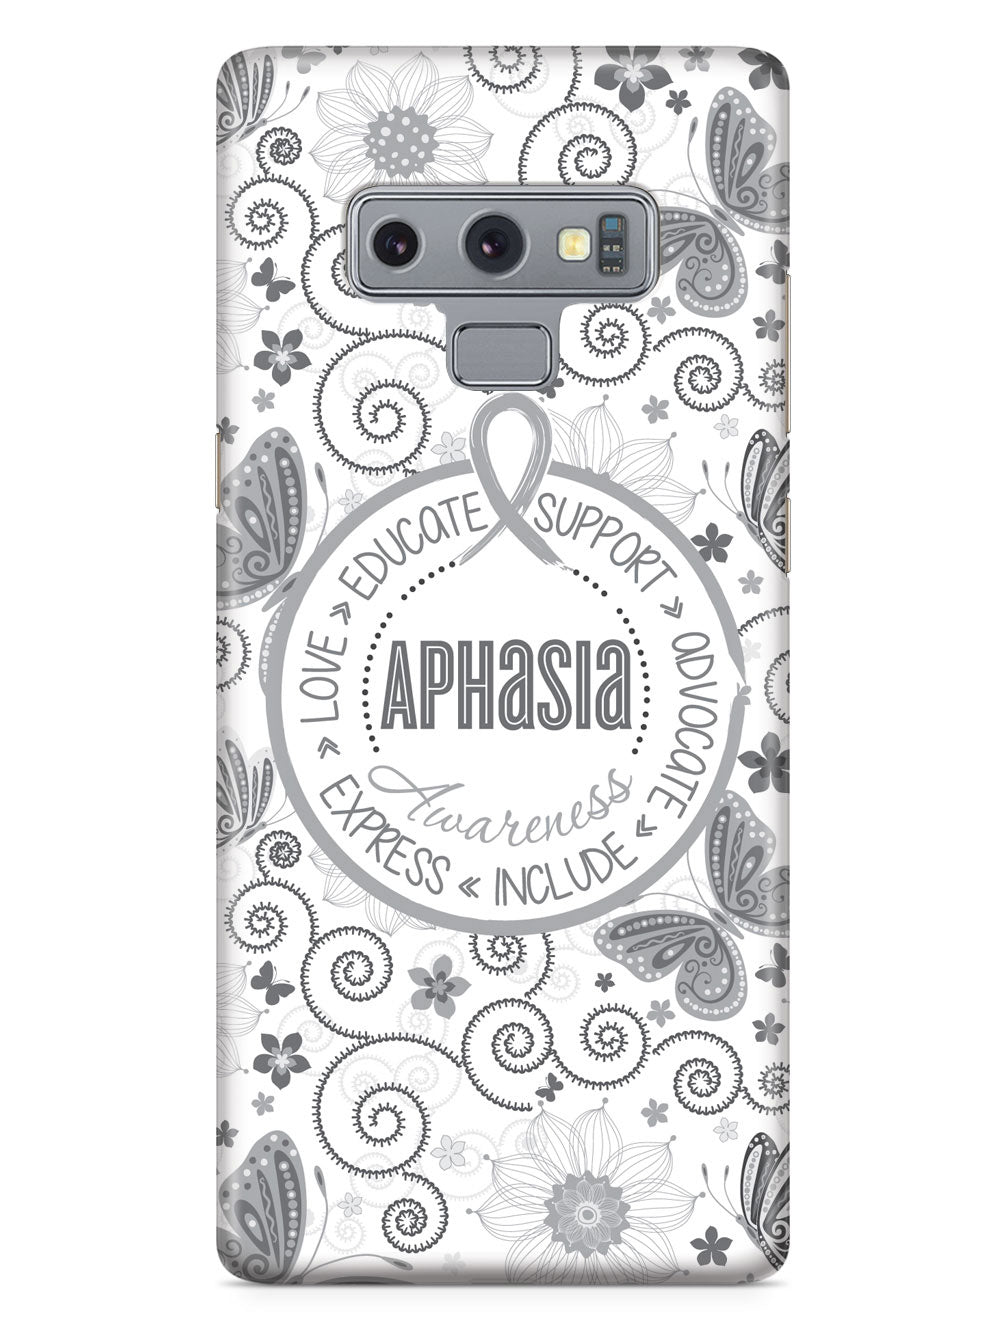 Aphasia Awareness - Butterfly Pattern Case